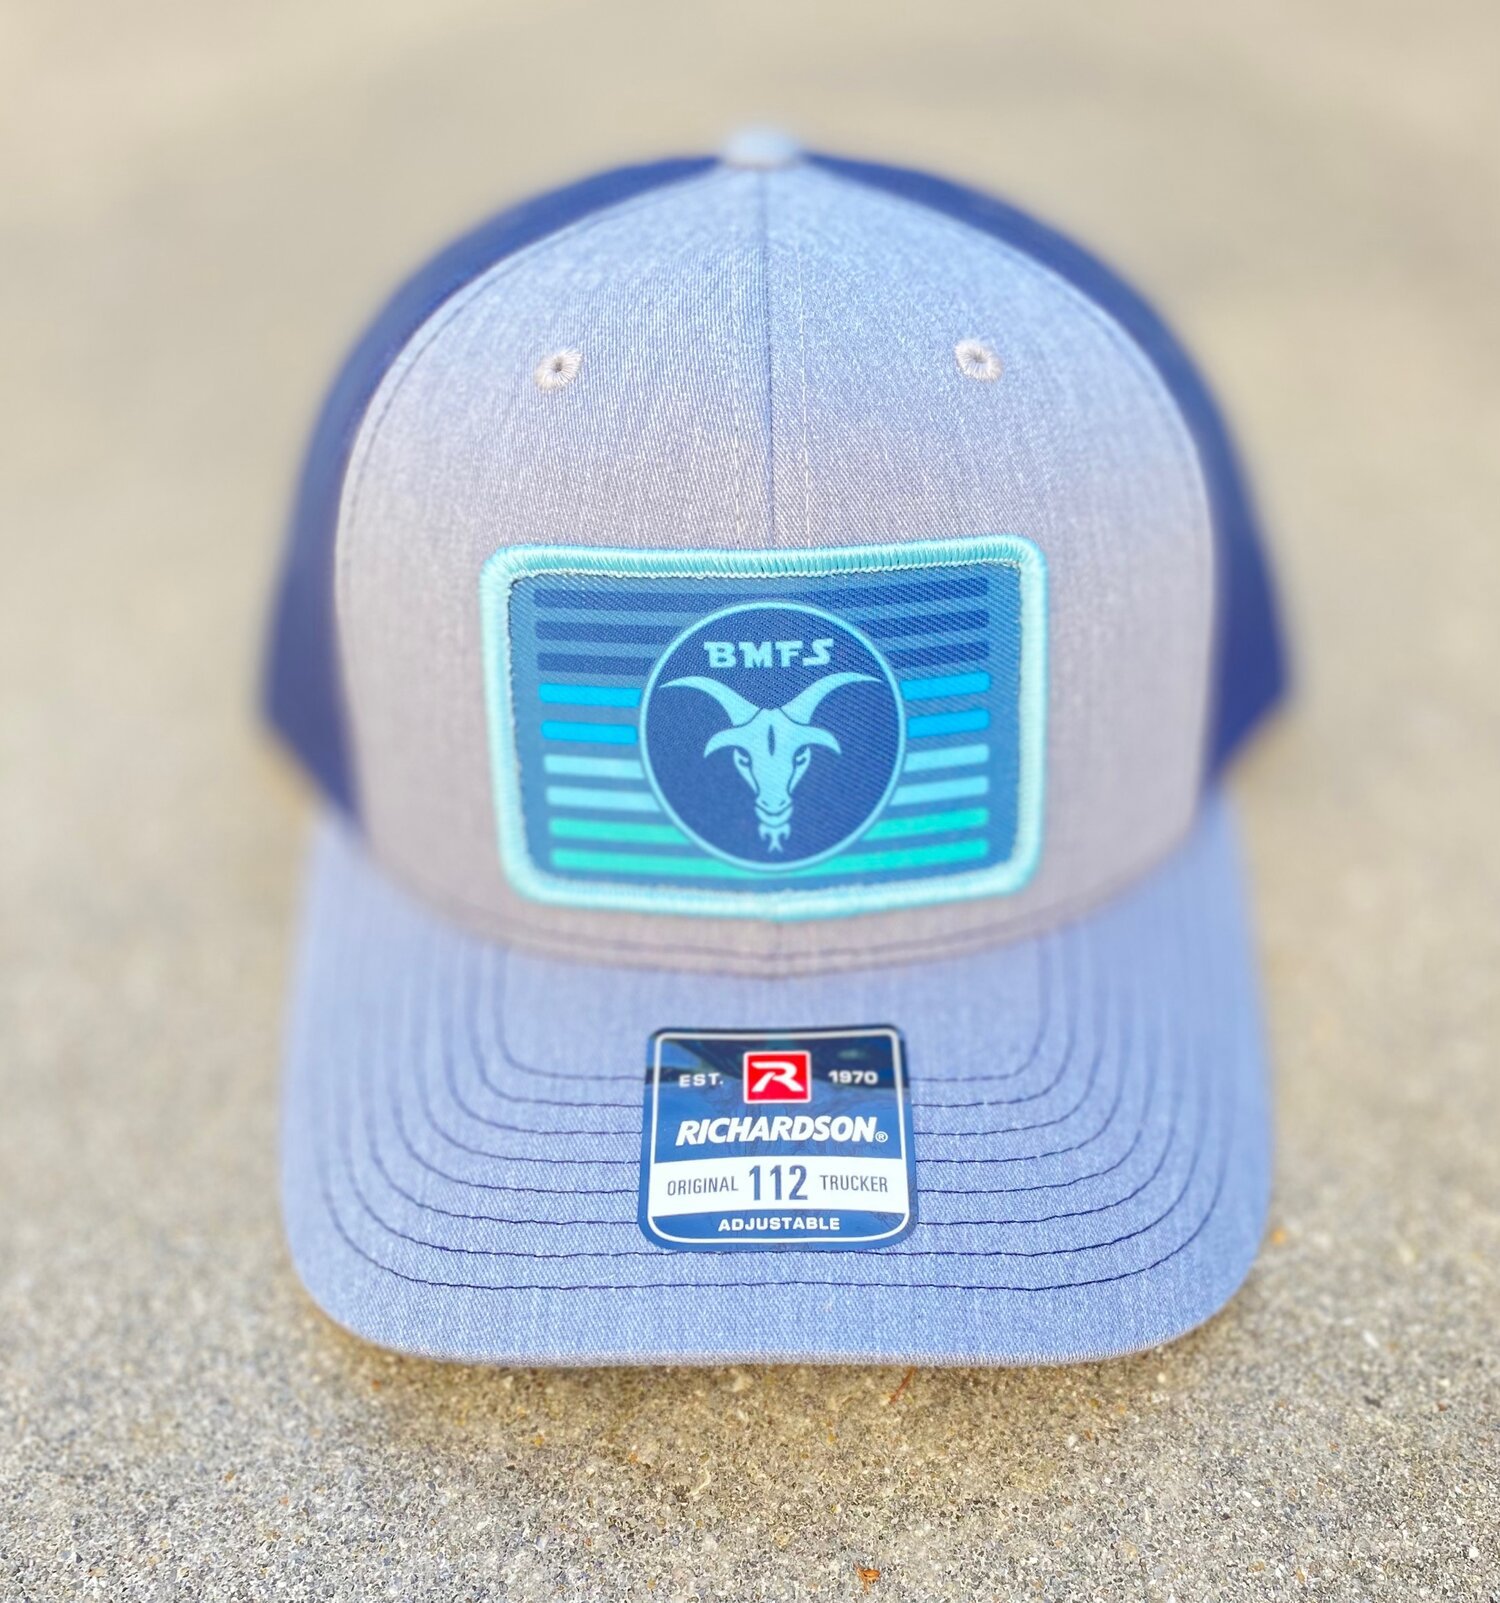 Attention all Billy Strings fans! Get ready to rock out in style with our exclusive line of hats designed just for you. Show off your love for this amazing band with our patch hats